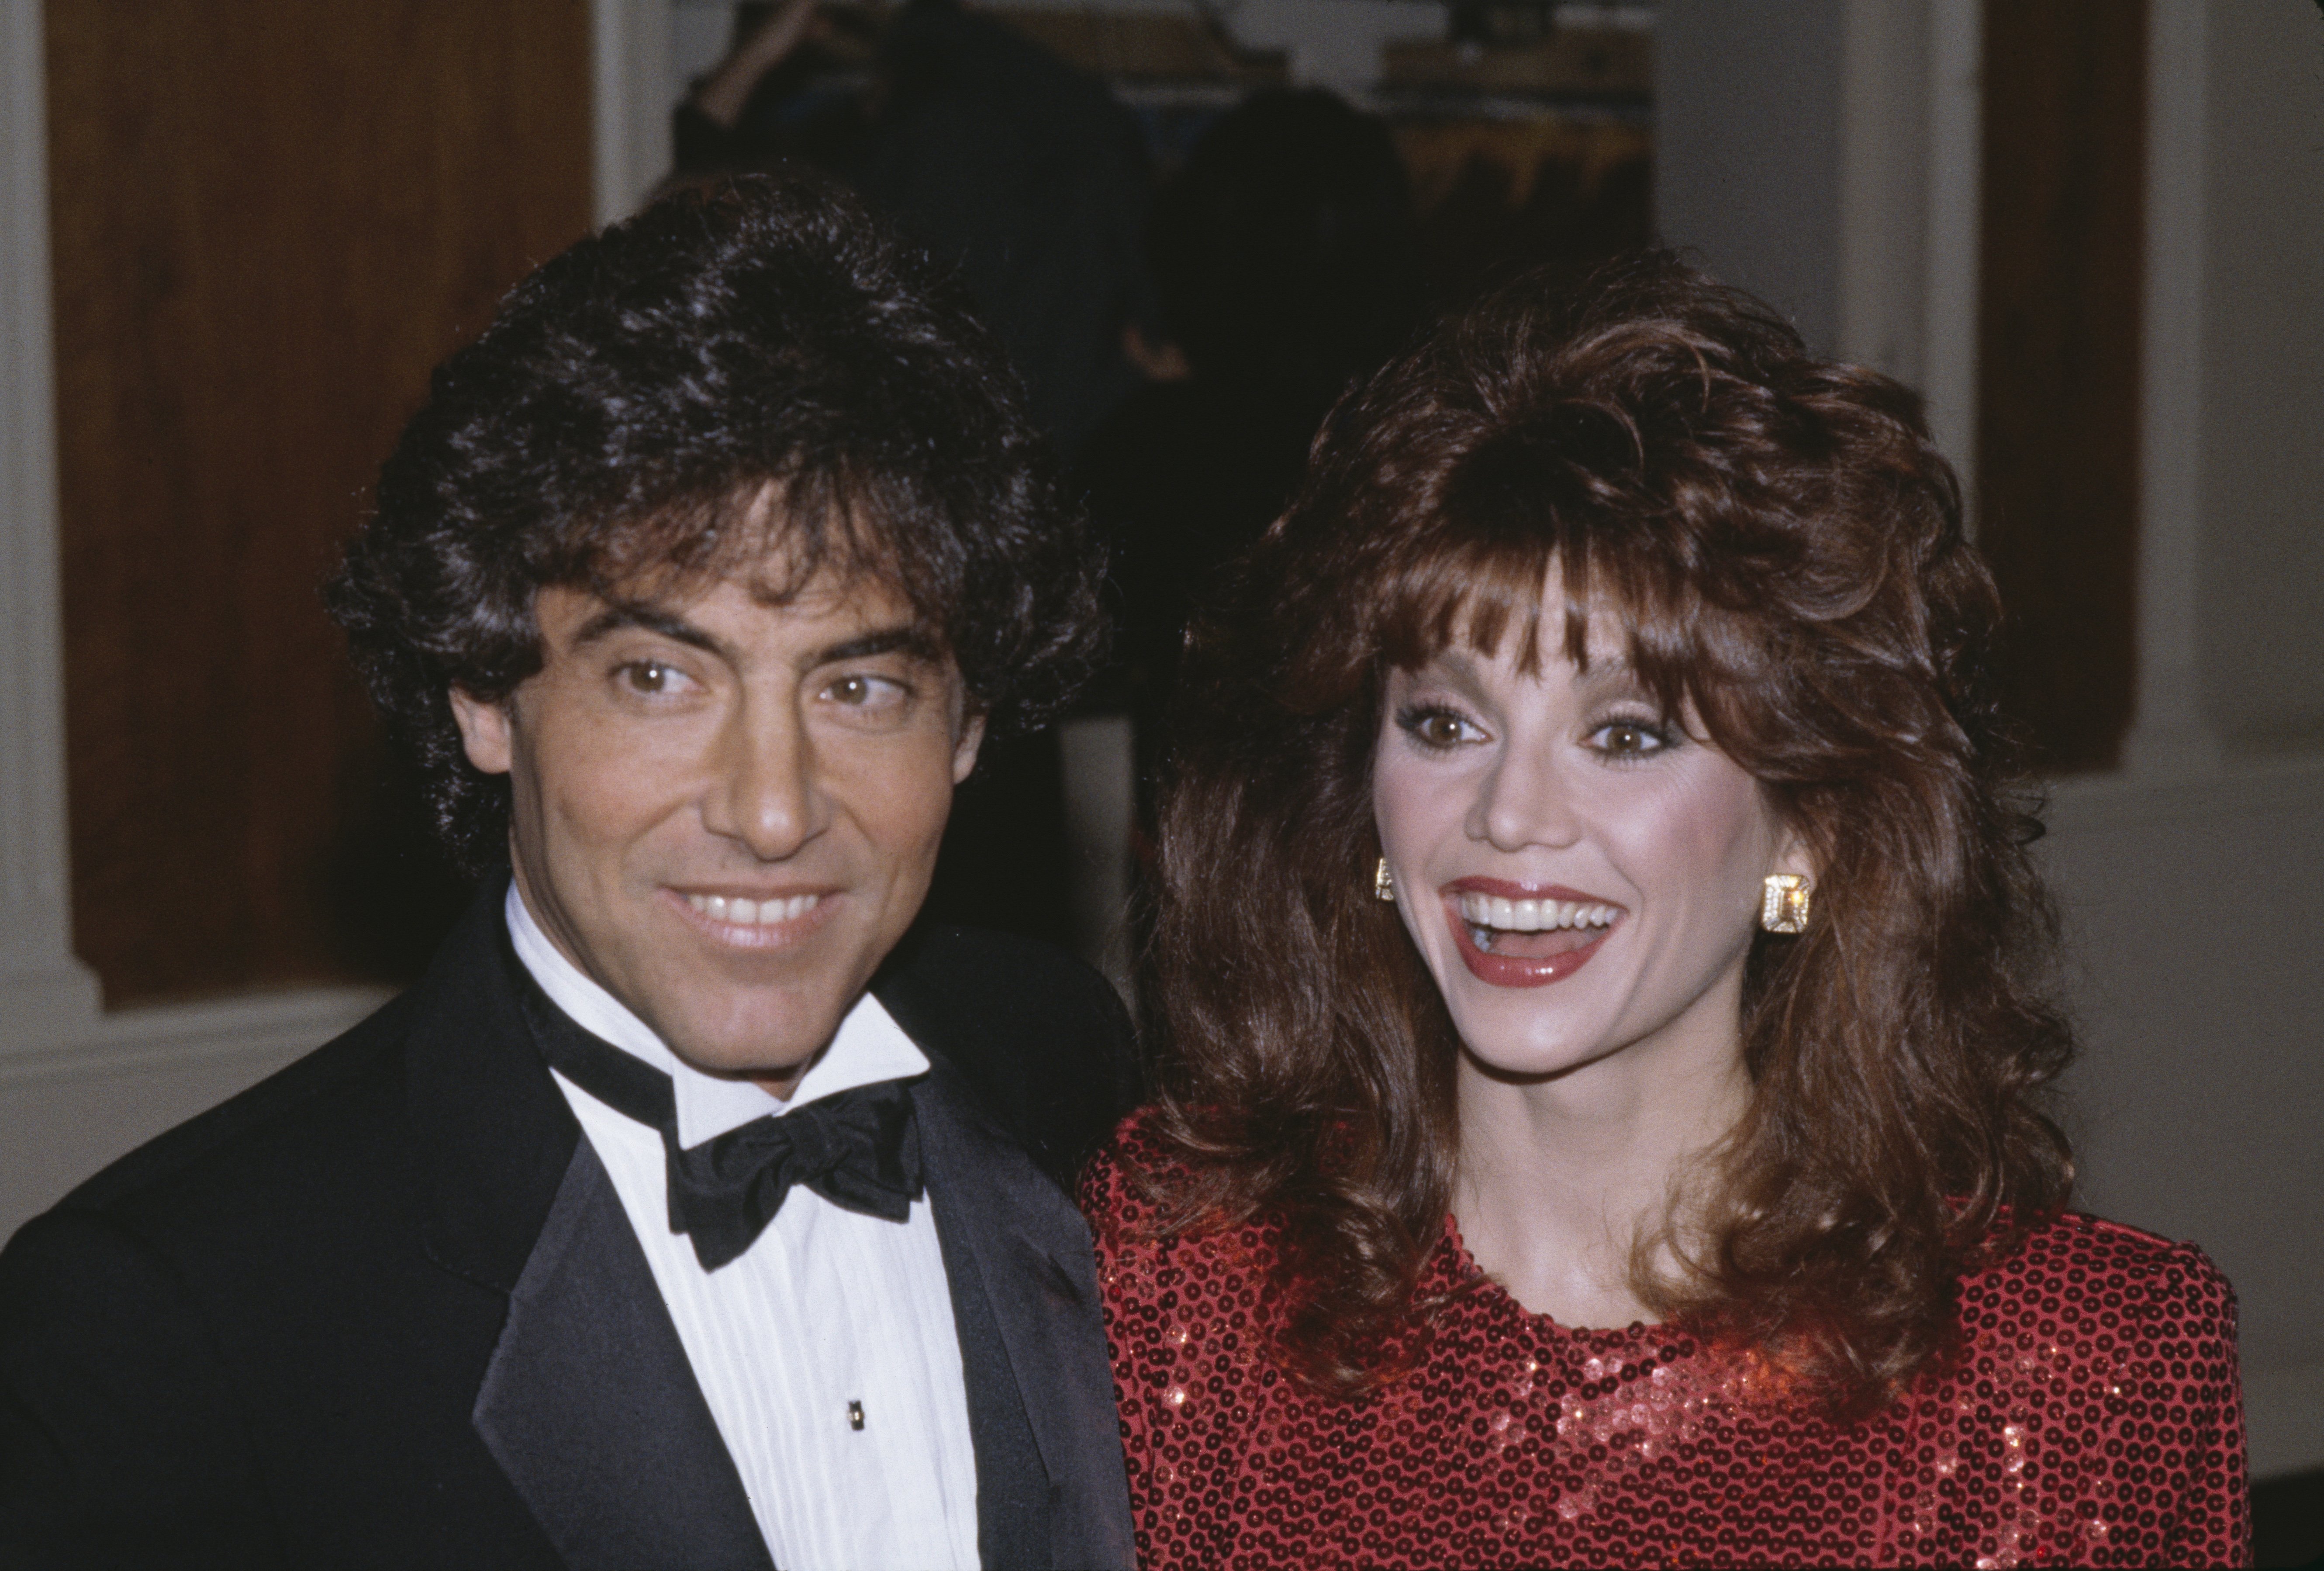 American plastic surgeon Dr Harry Glassman and his wife, American actress Victoria Principal attend the 40th Annual Golden Globe Awards, held at the Beverly Hilton Hotel in Beverly Hills, California, 29th January 1983 | Source: Getty Images